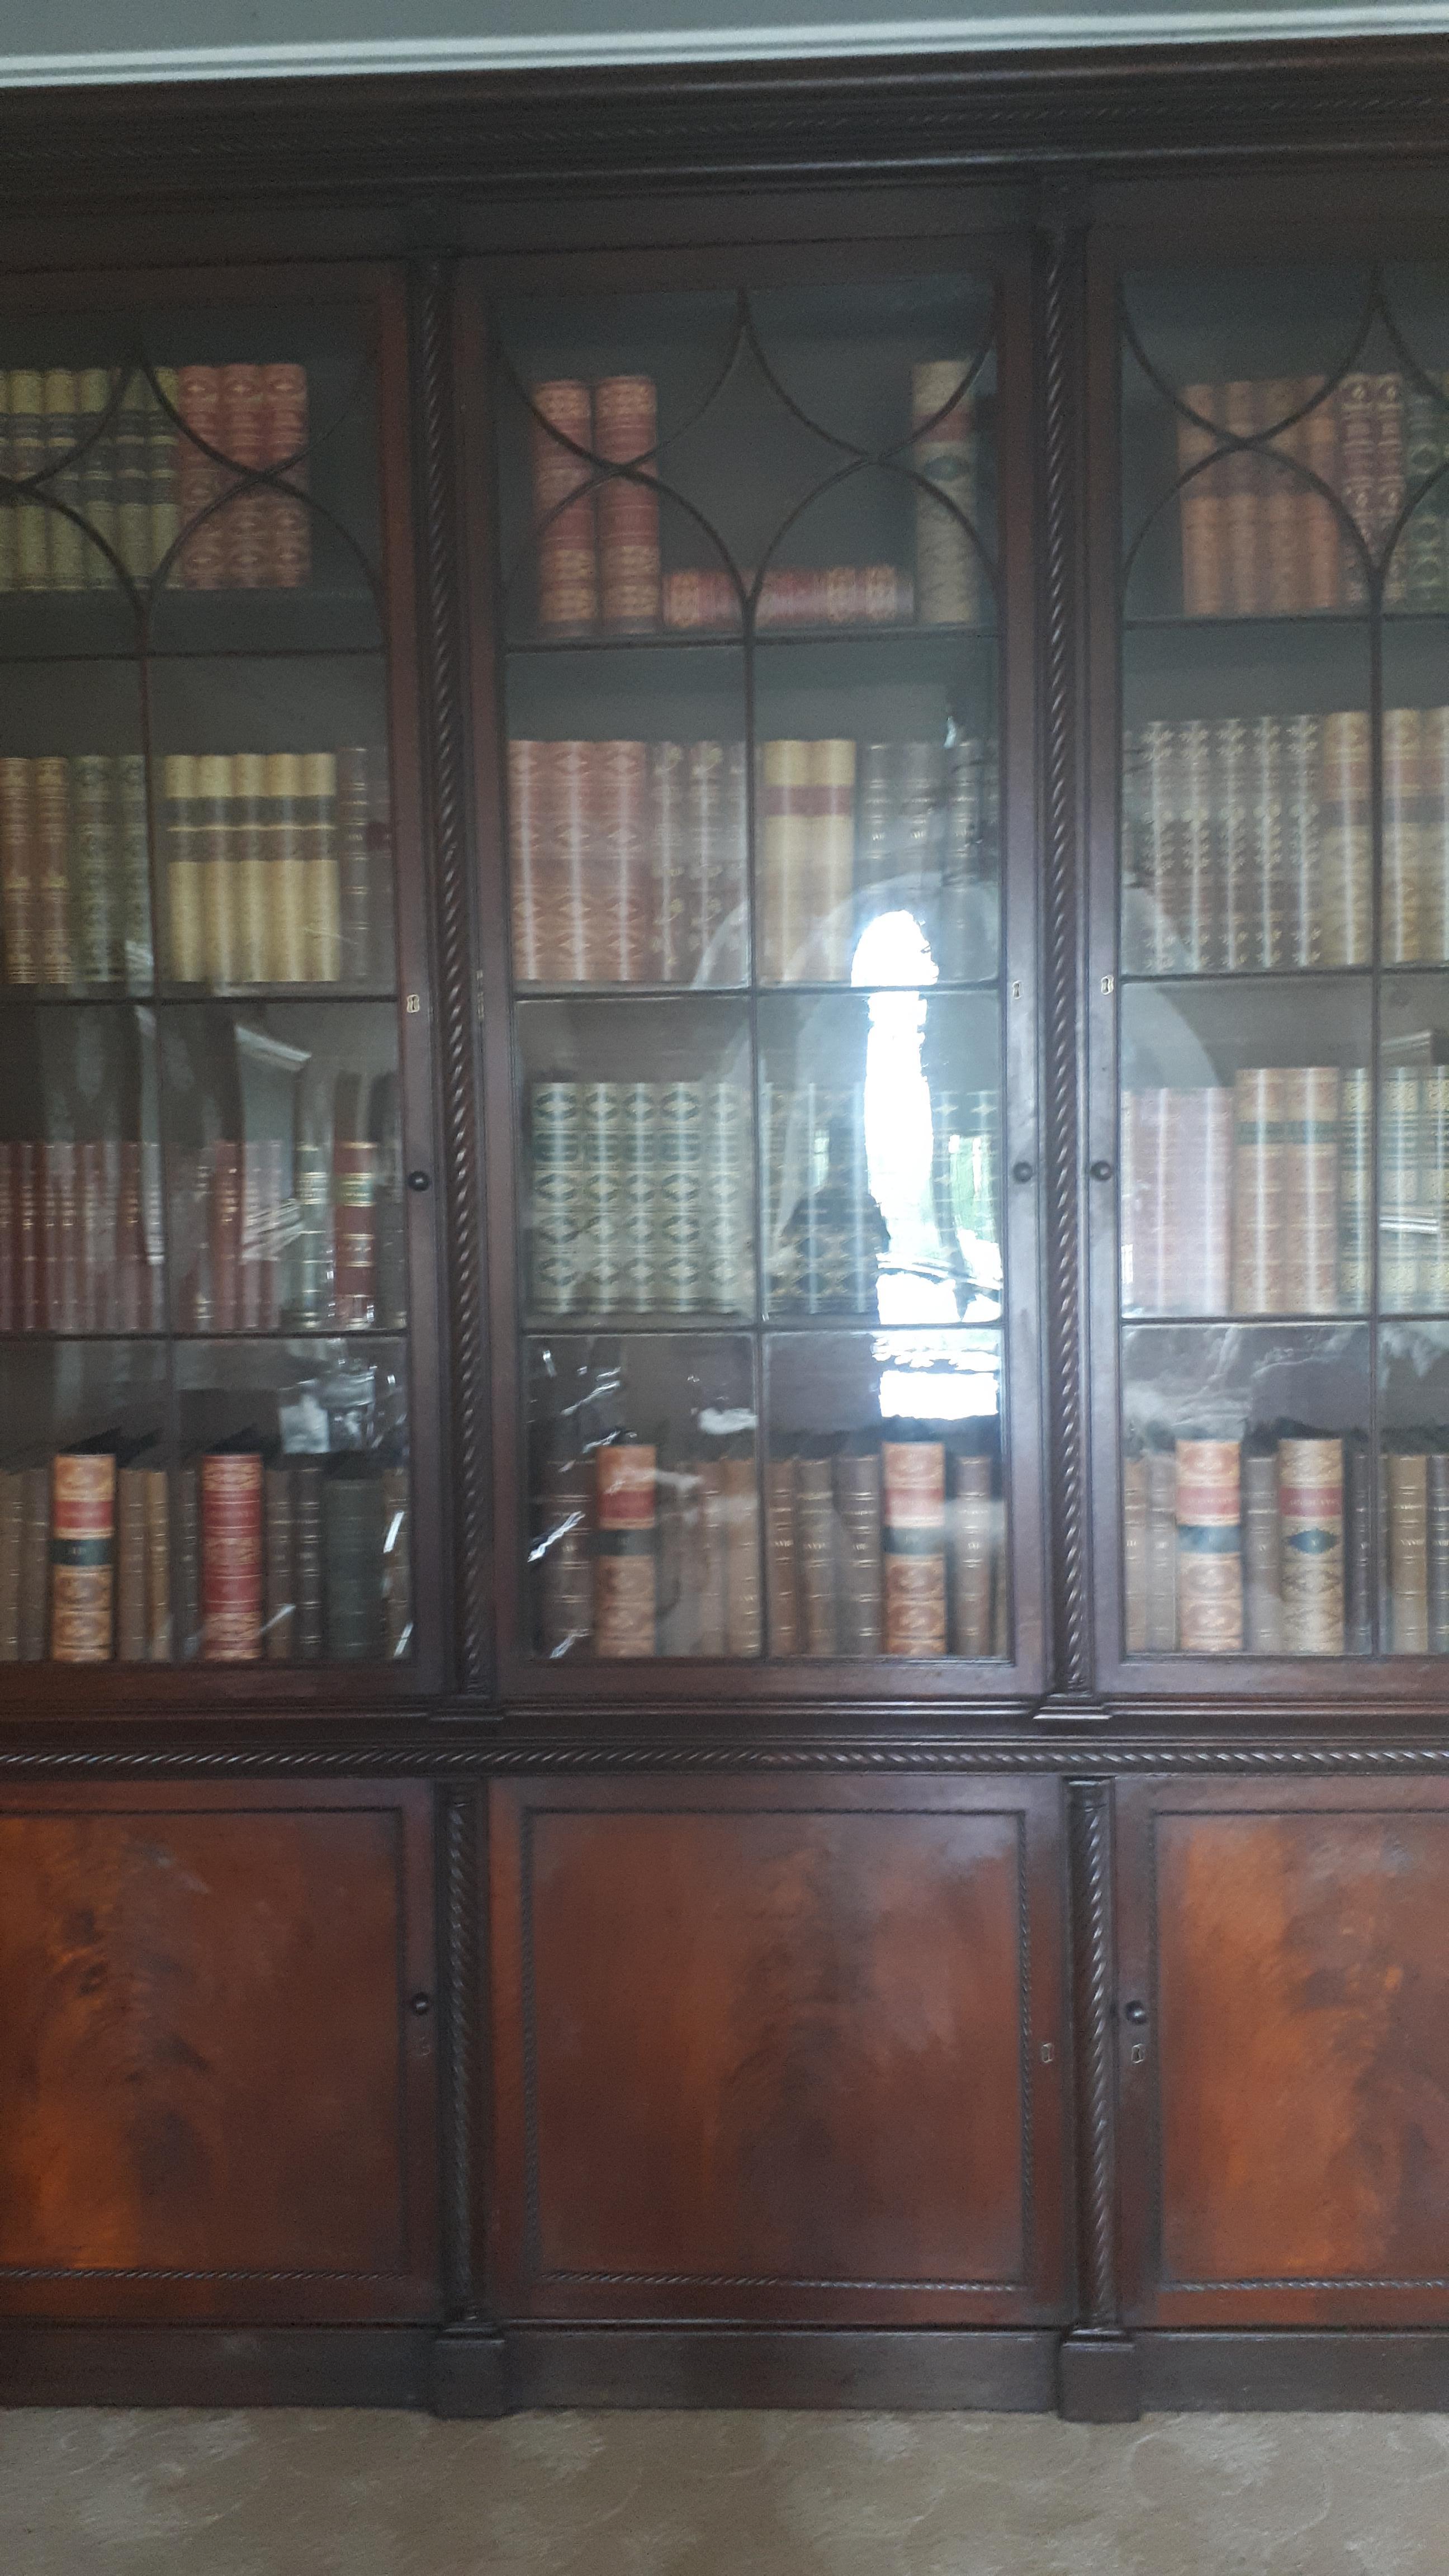 Important Monumental Irish Bookcase Attributed to Mack Williams & Gibton In Good Condition For Sale In Dromod, Co. Leitrim